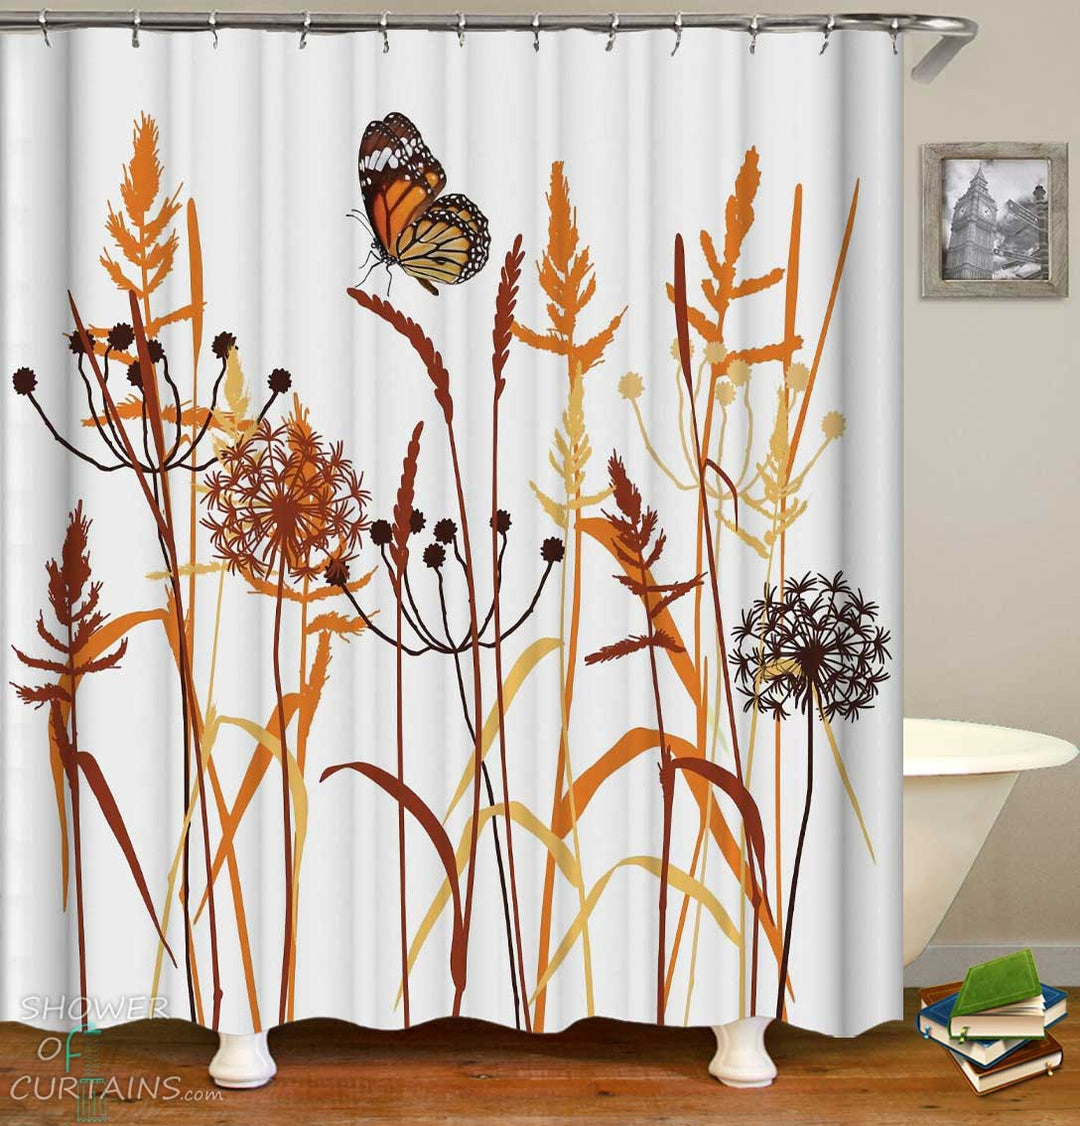 Shower Curtains with Butterfly over Dry Field Crop